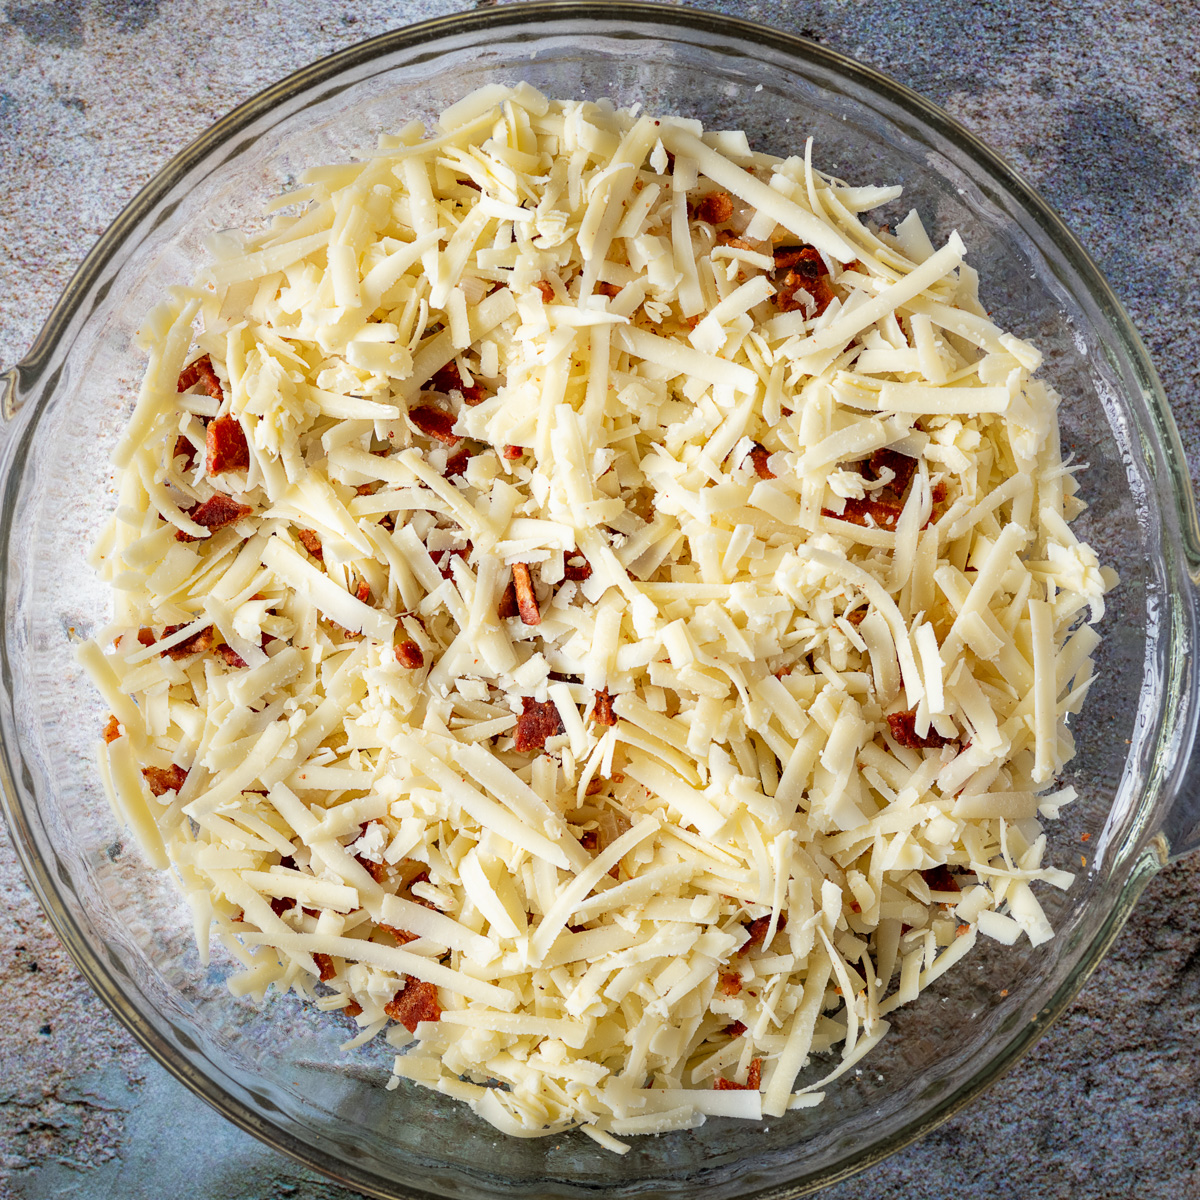 Add additional layers of bacon, onion and cheese to pie dish.